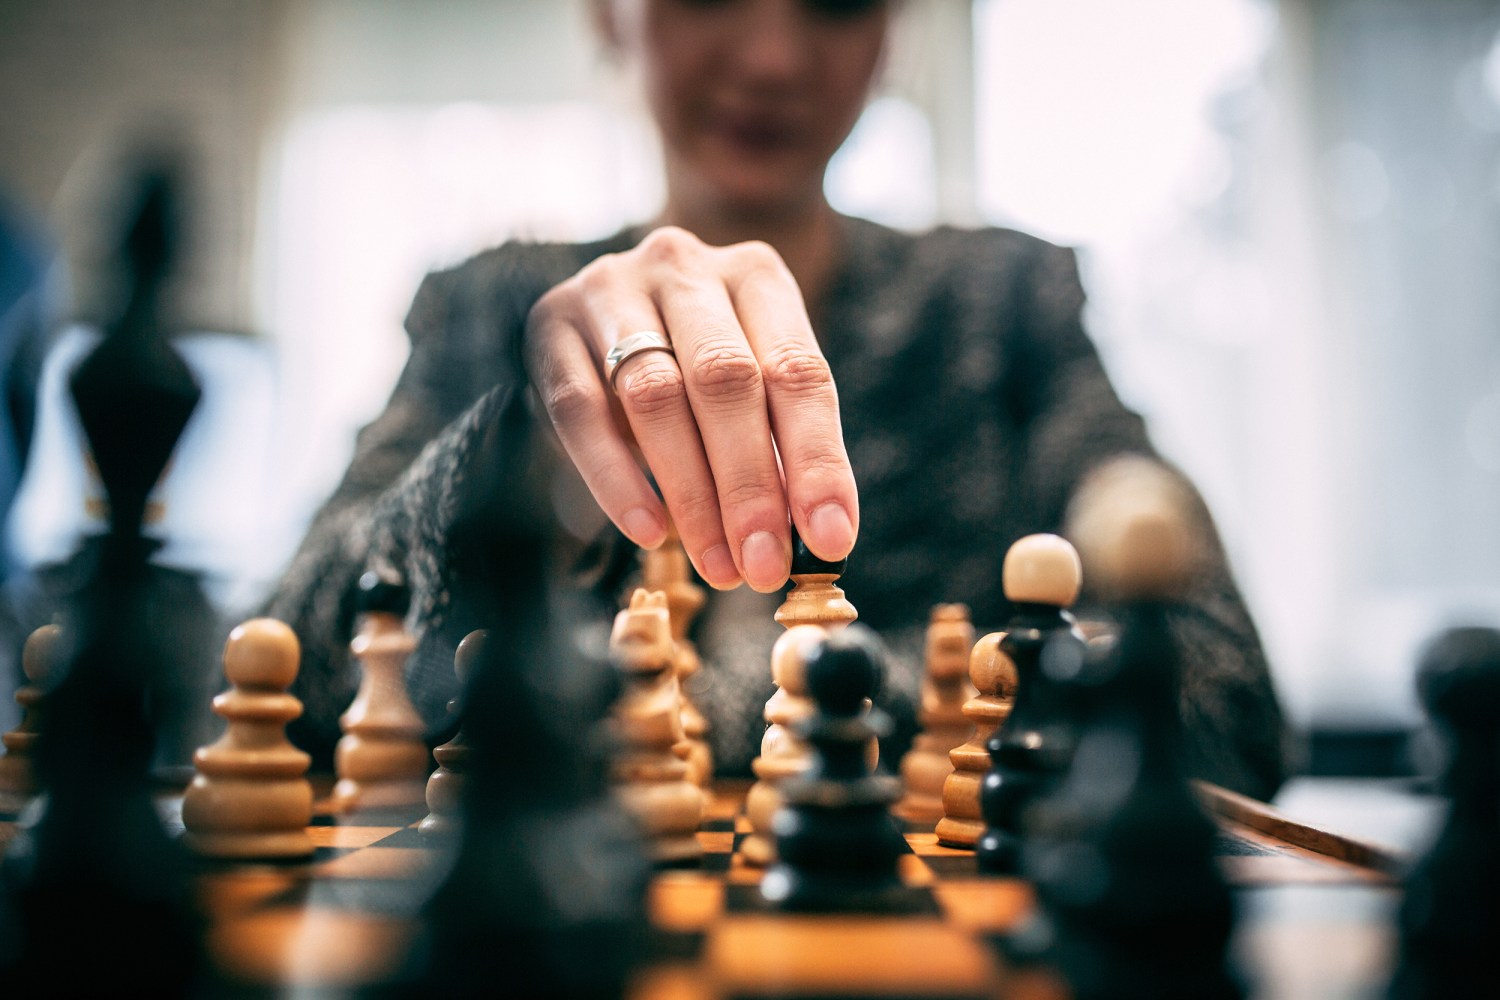 Concerned wife asks for advice about husband's newfound chess